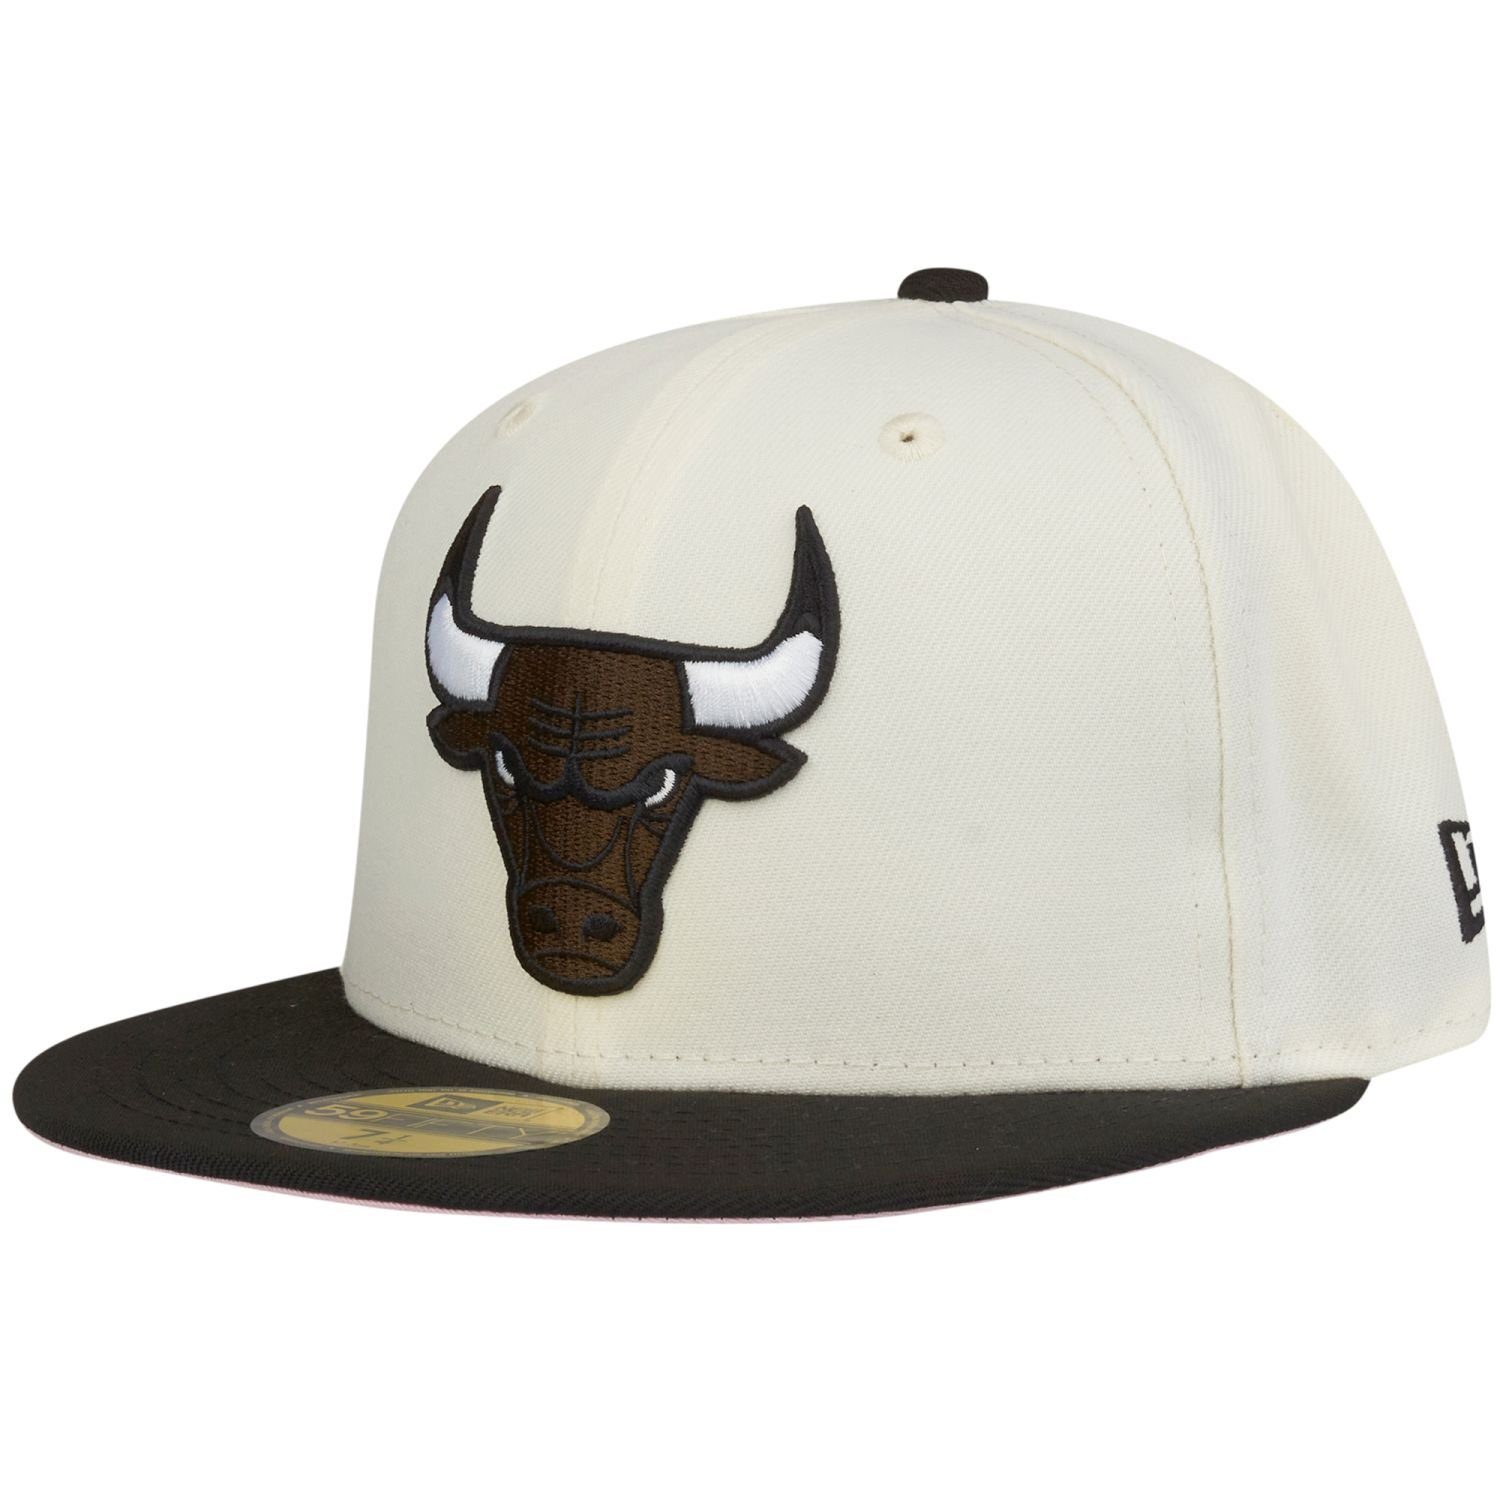 59Fifty Era New Fitted CHAMPIONS Cap Chicago Bulls